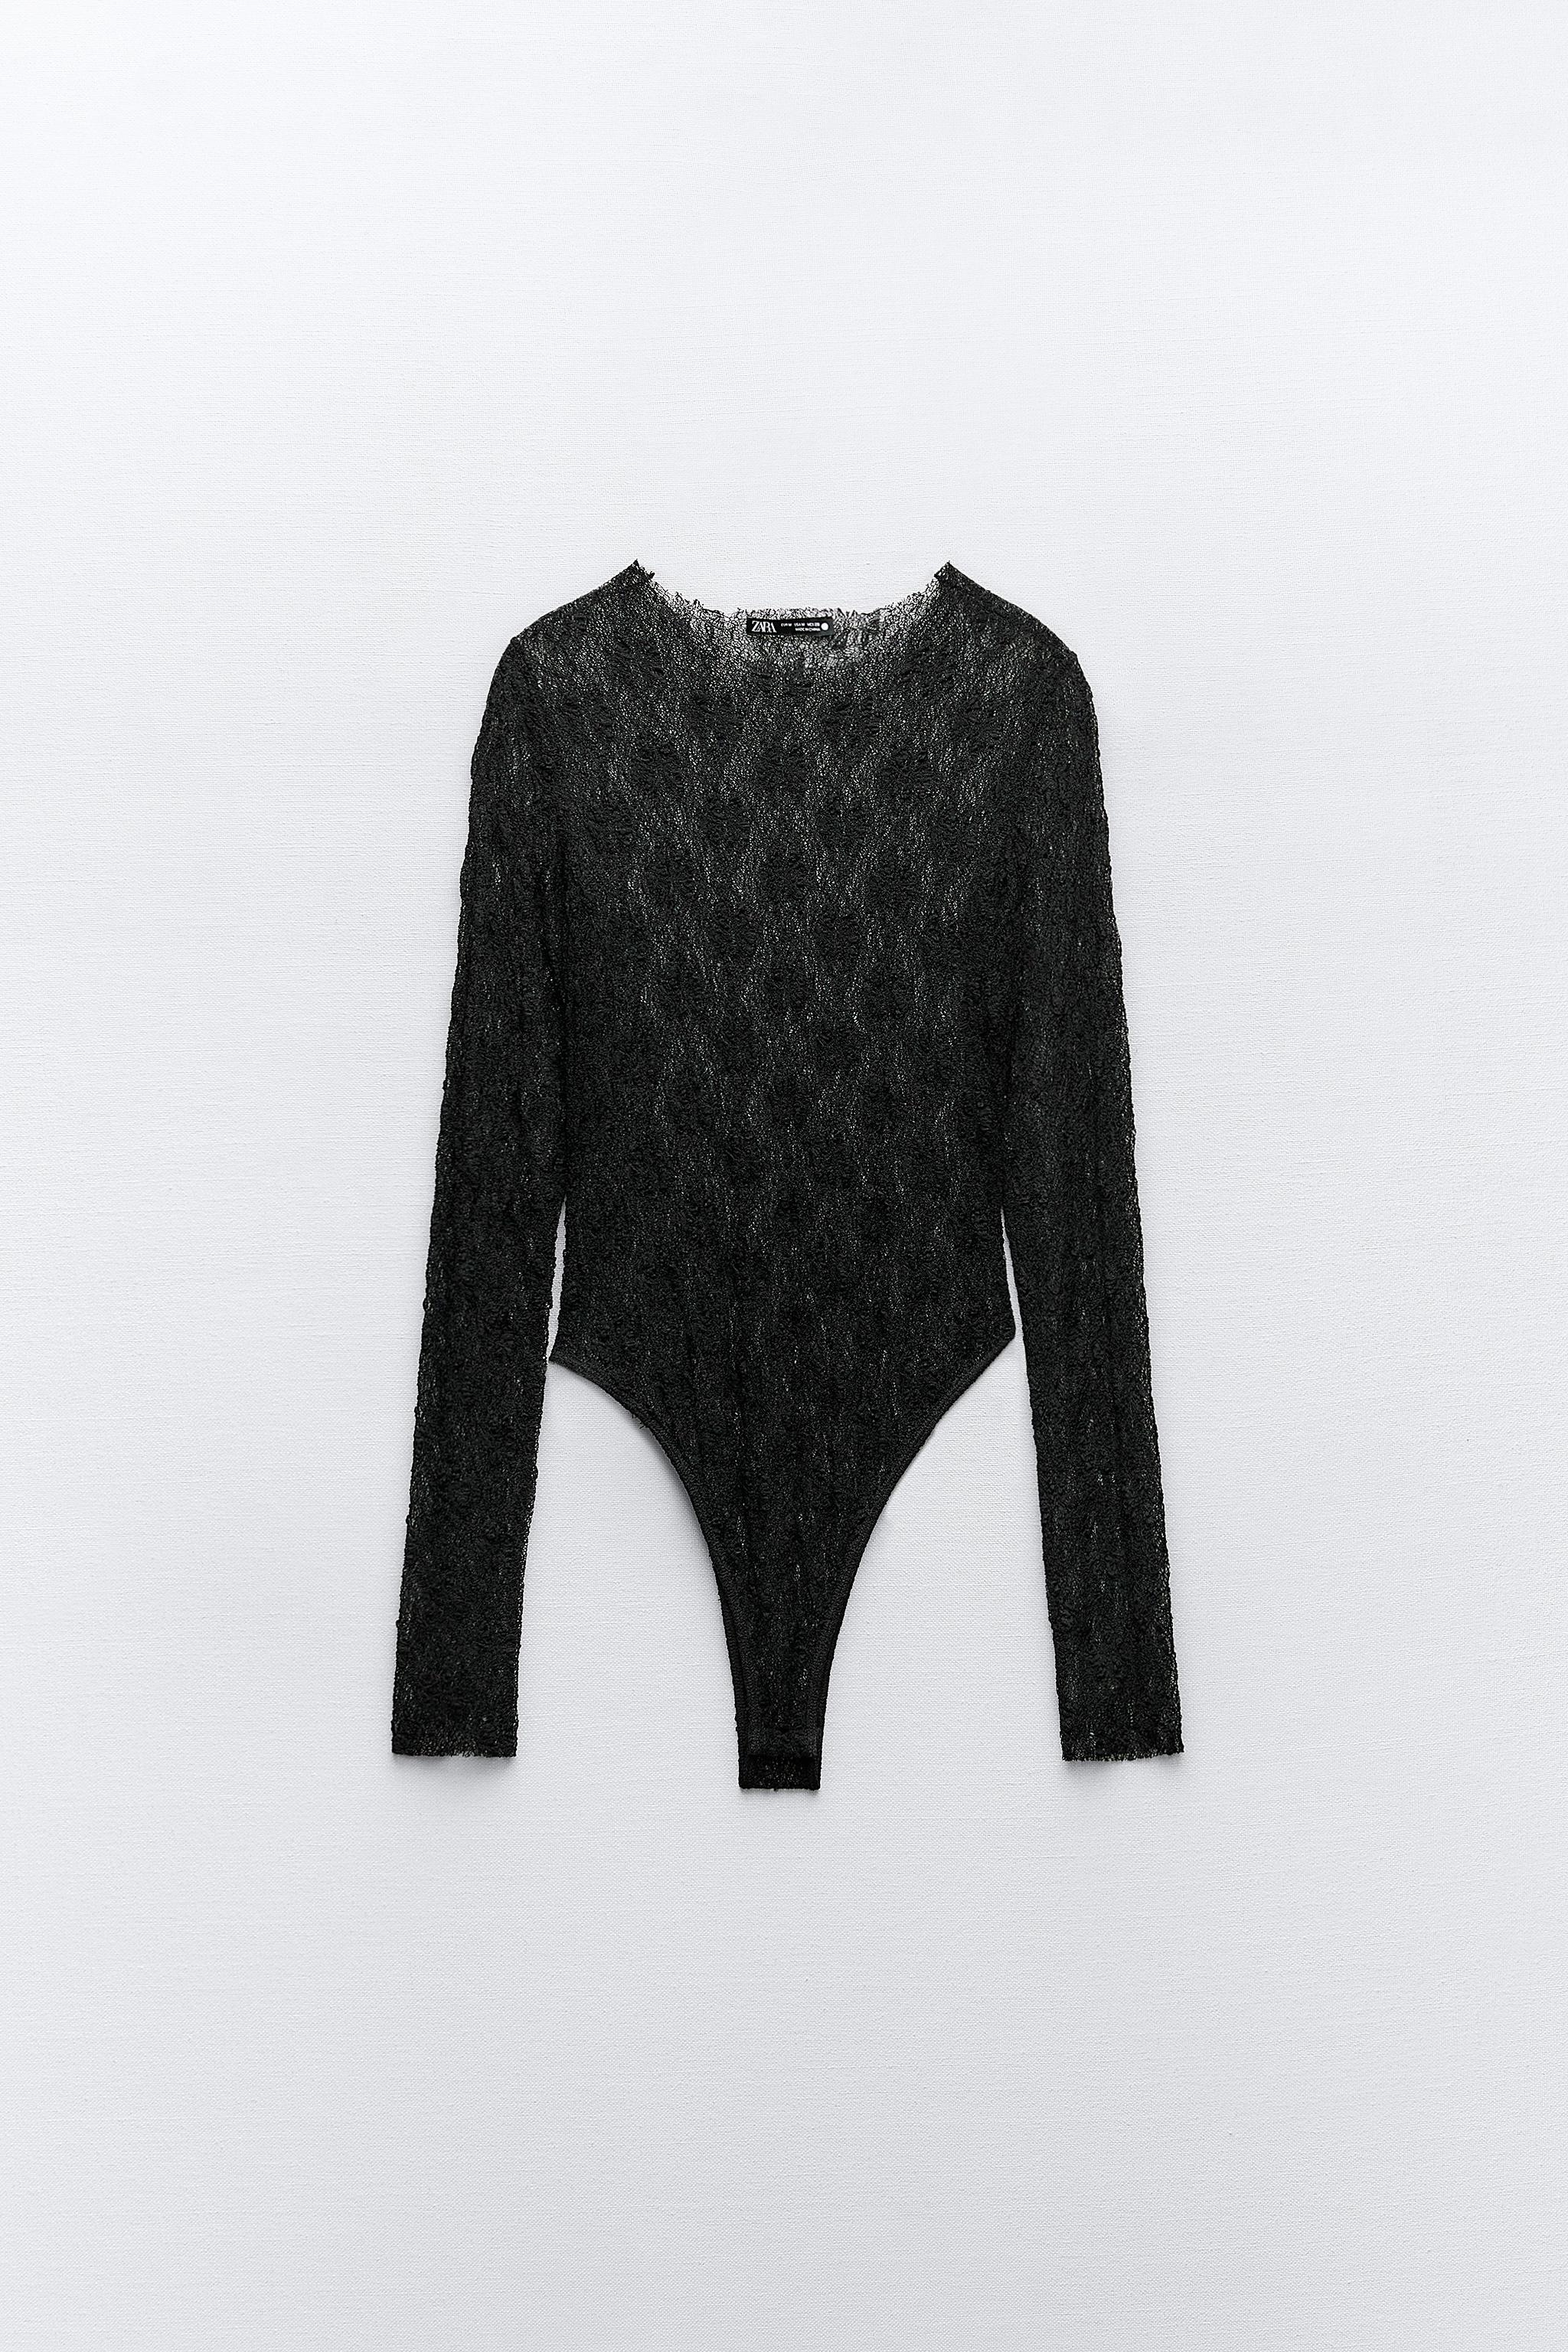 ZARA Wrap Long Sleeve Lace Black Bodysuit Top 5039/860 - M size (new with  tags)